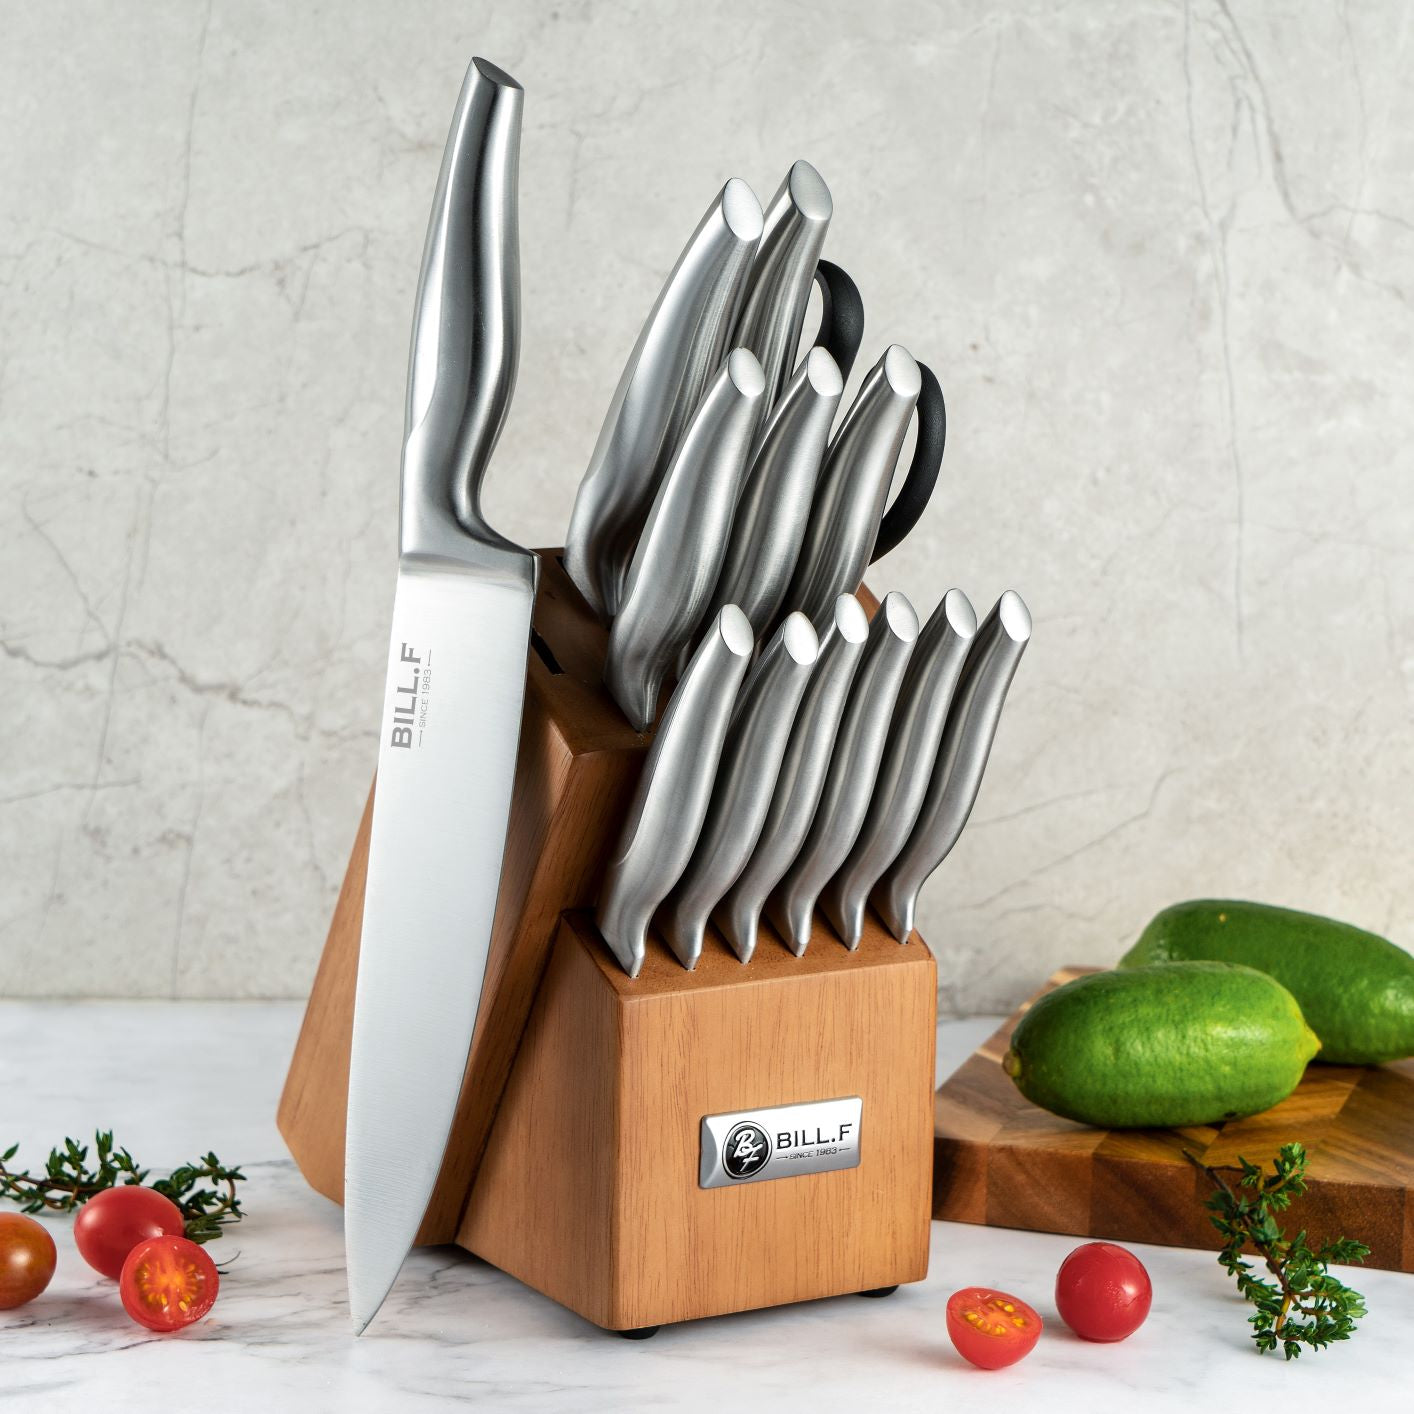 NEW Knife Set, No Rust 16 Pieces Knives Set , Knife Block Set with